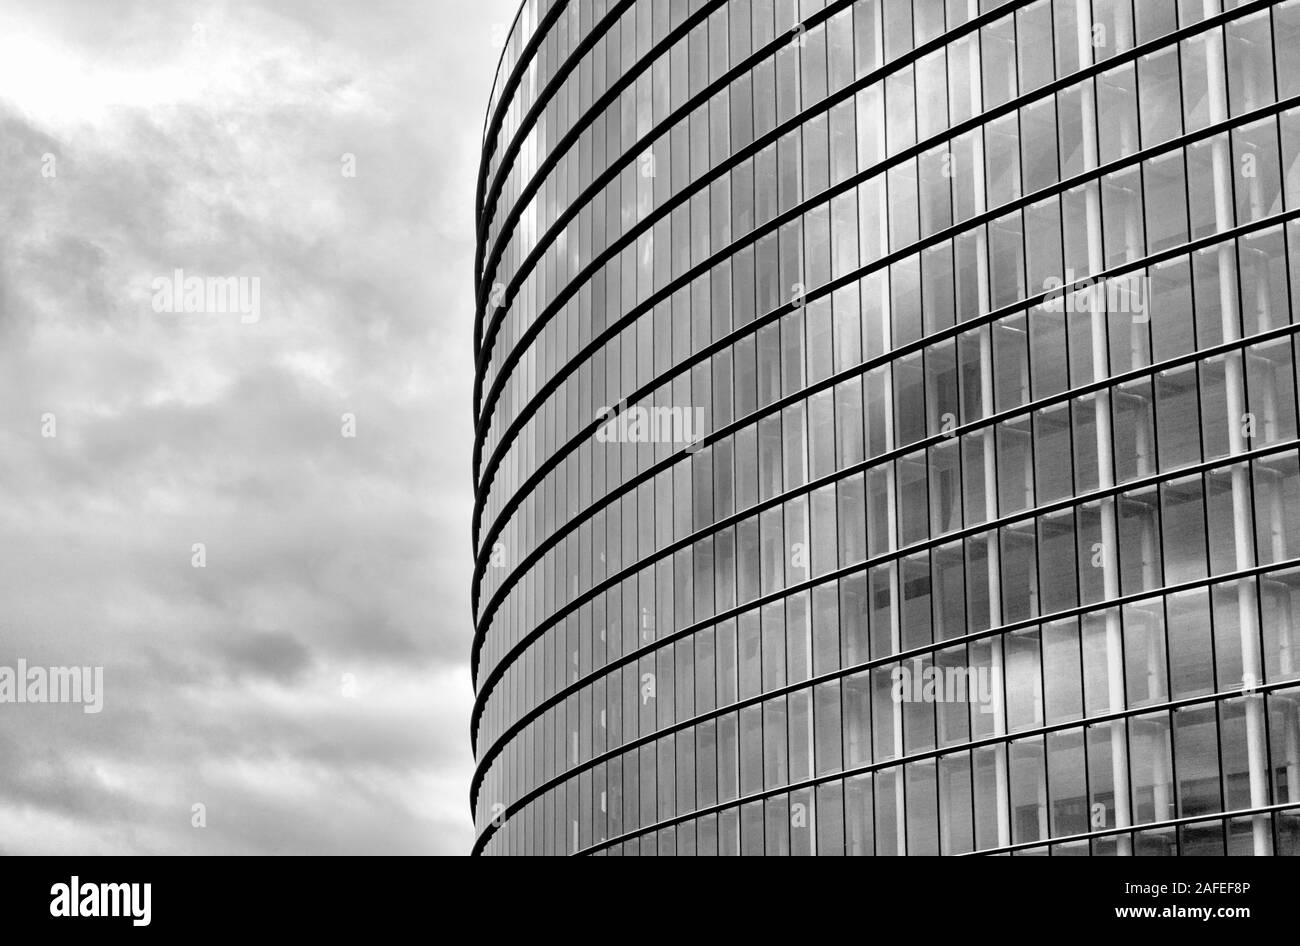 Horizontal view of a modern steel and glass building with many windows and levels and an expressive overcast sky background in black and white Stock Photo